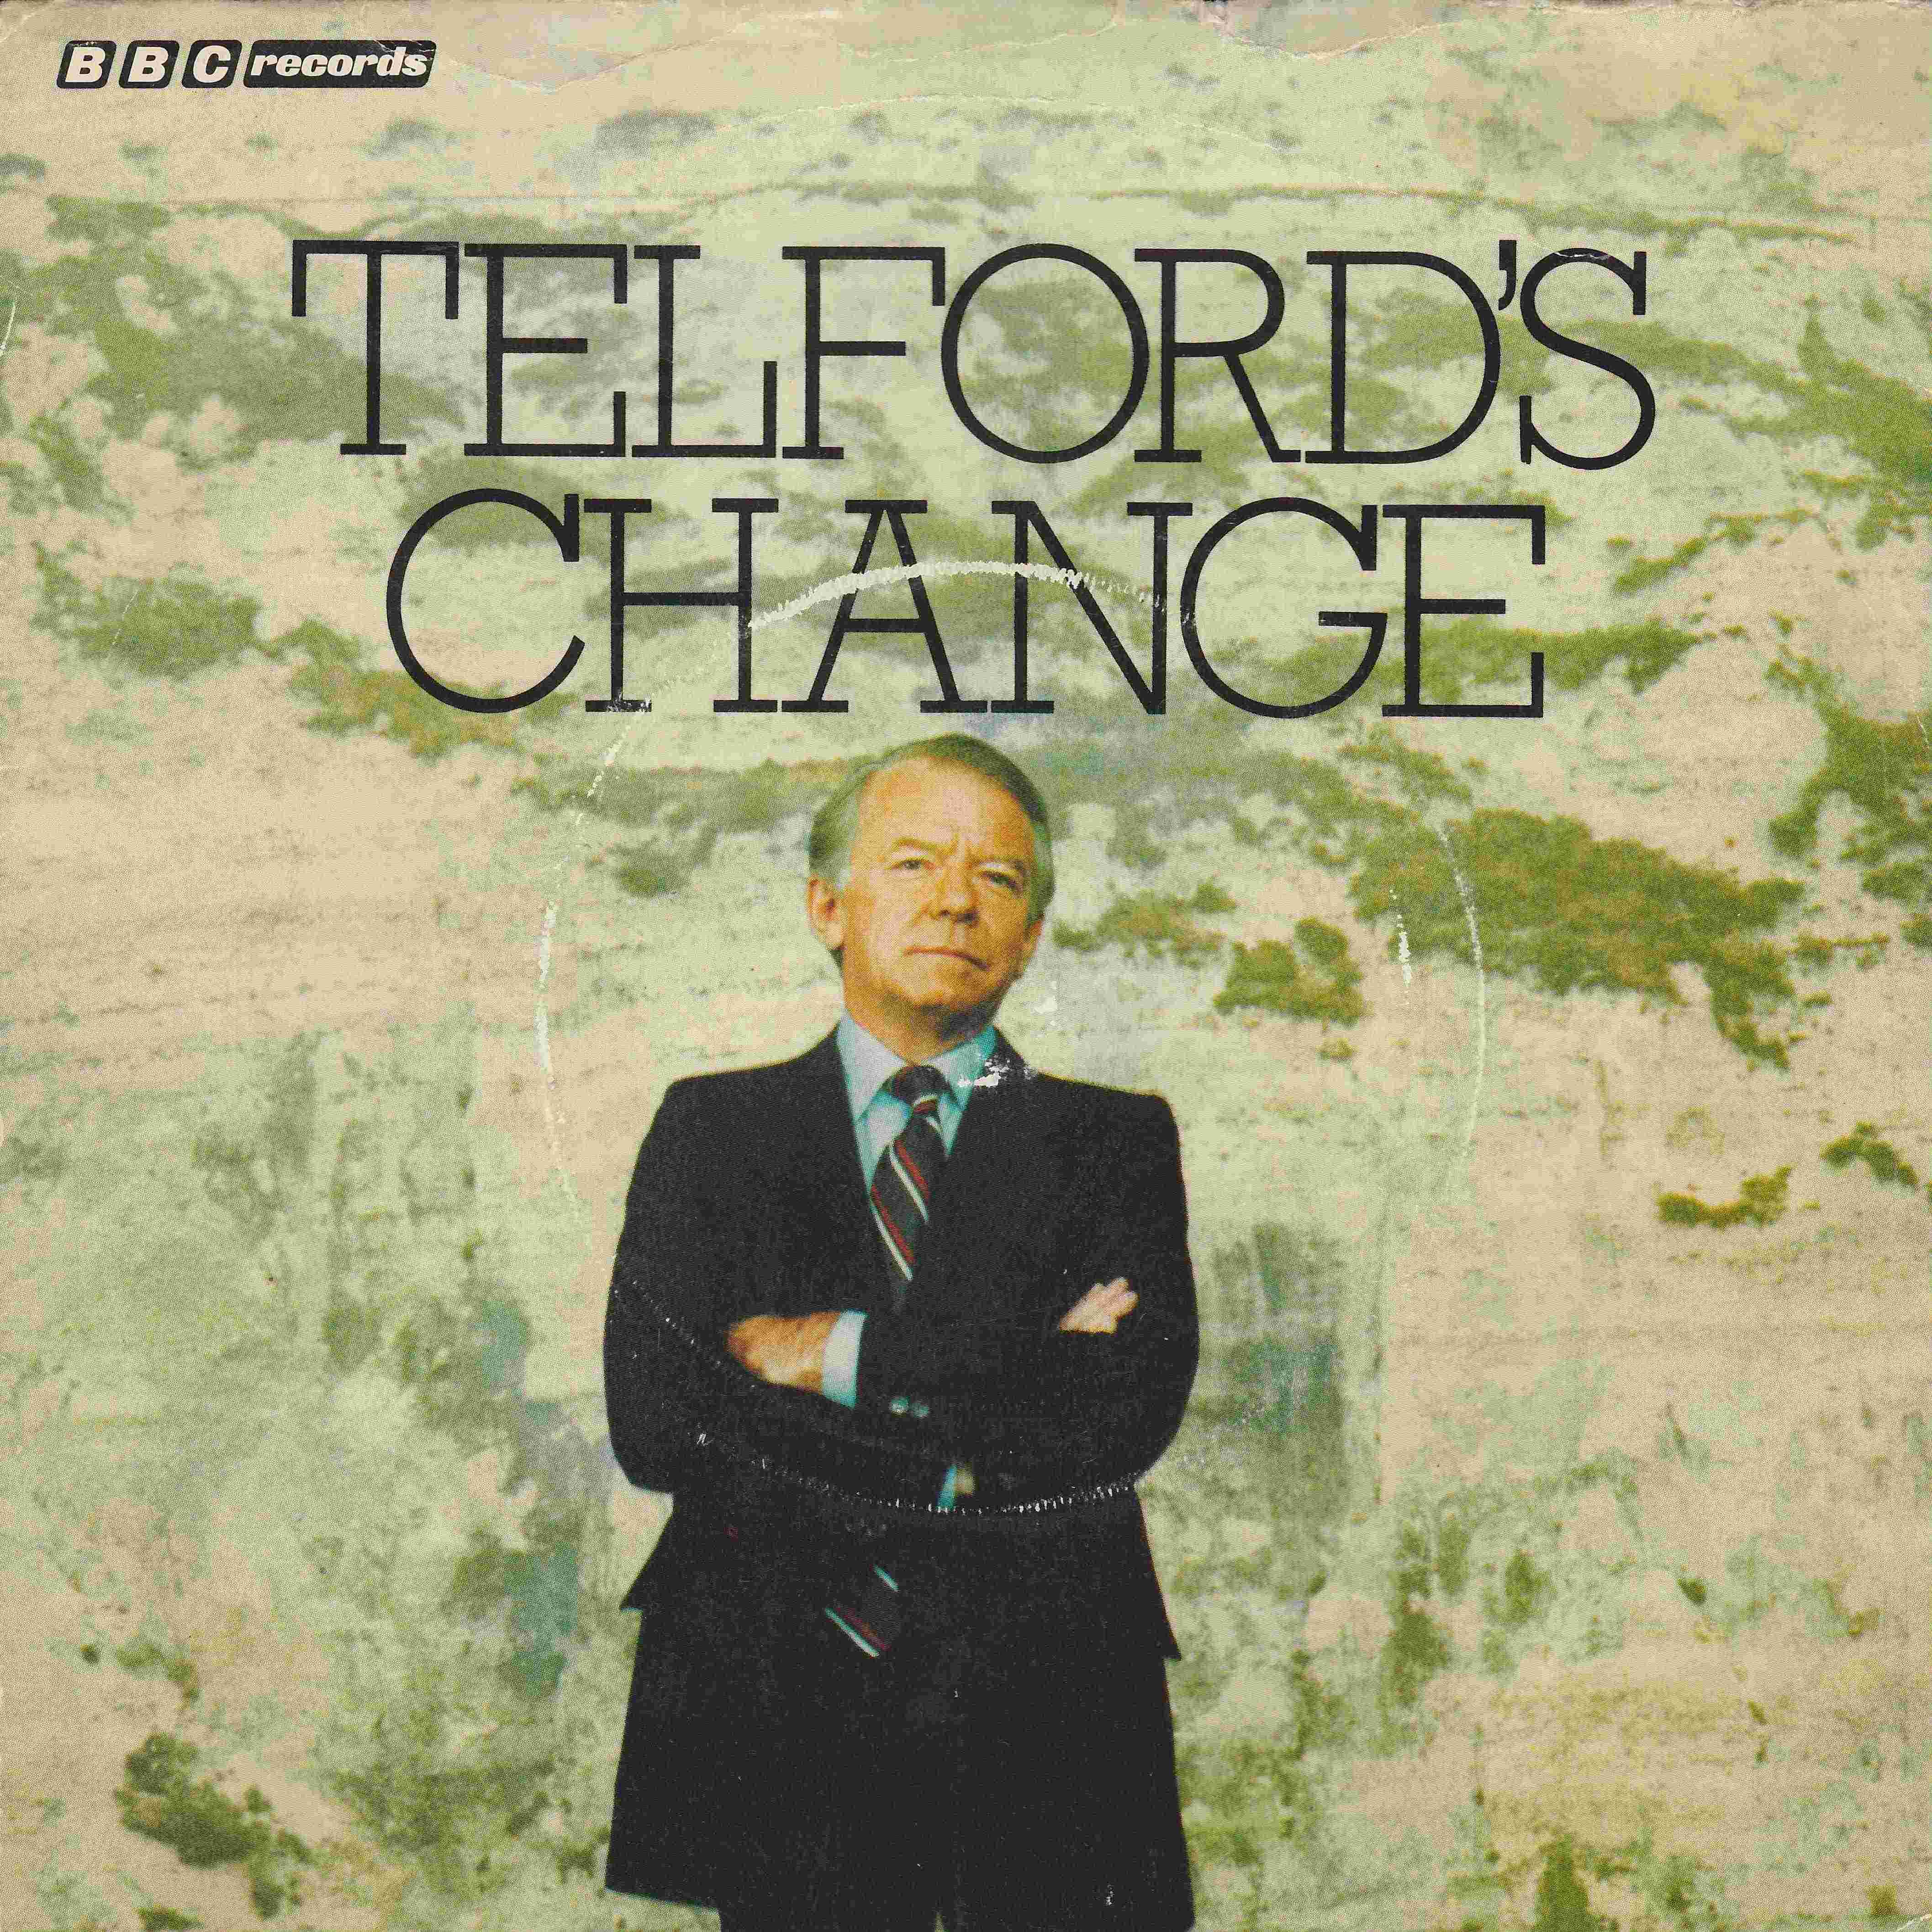 Picture of RESL 63 Telford's change by artist John Dankworth from the BBC records and Tapes library